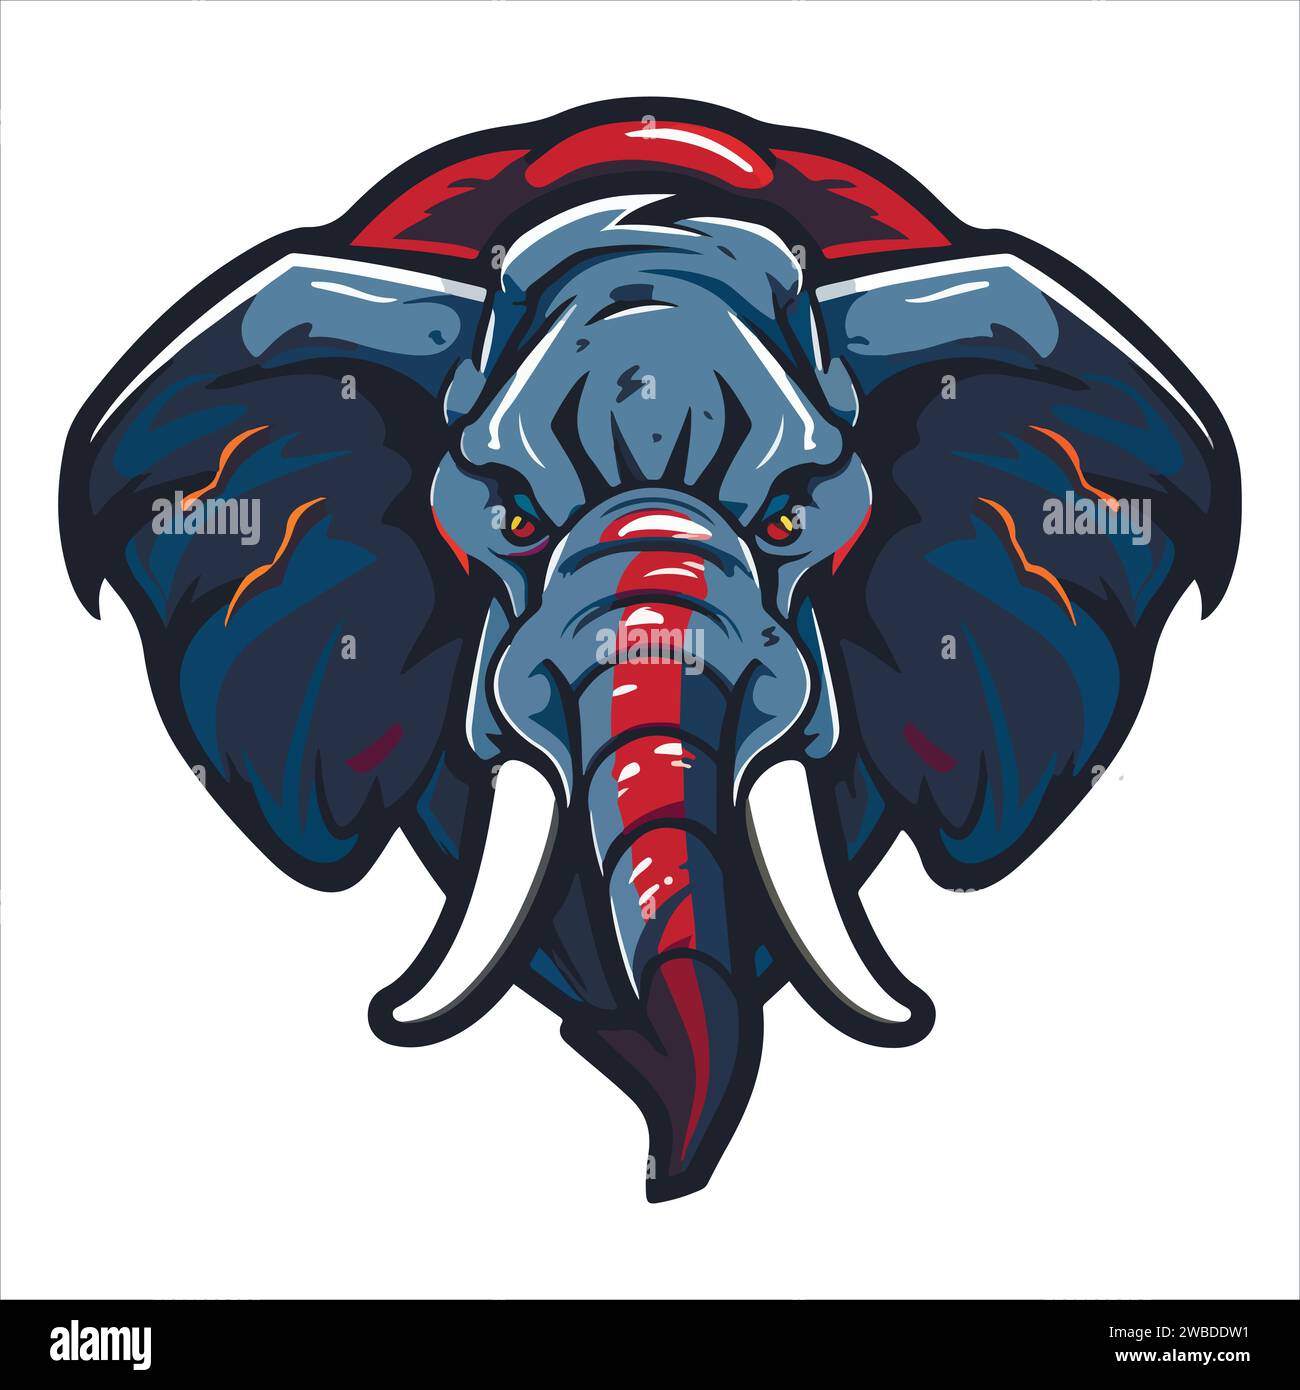 elephant mascot logo design vector with modern illustration concept style for badge, emblem and tshirt printing. angry elephant illustration with feet Stock Vector